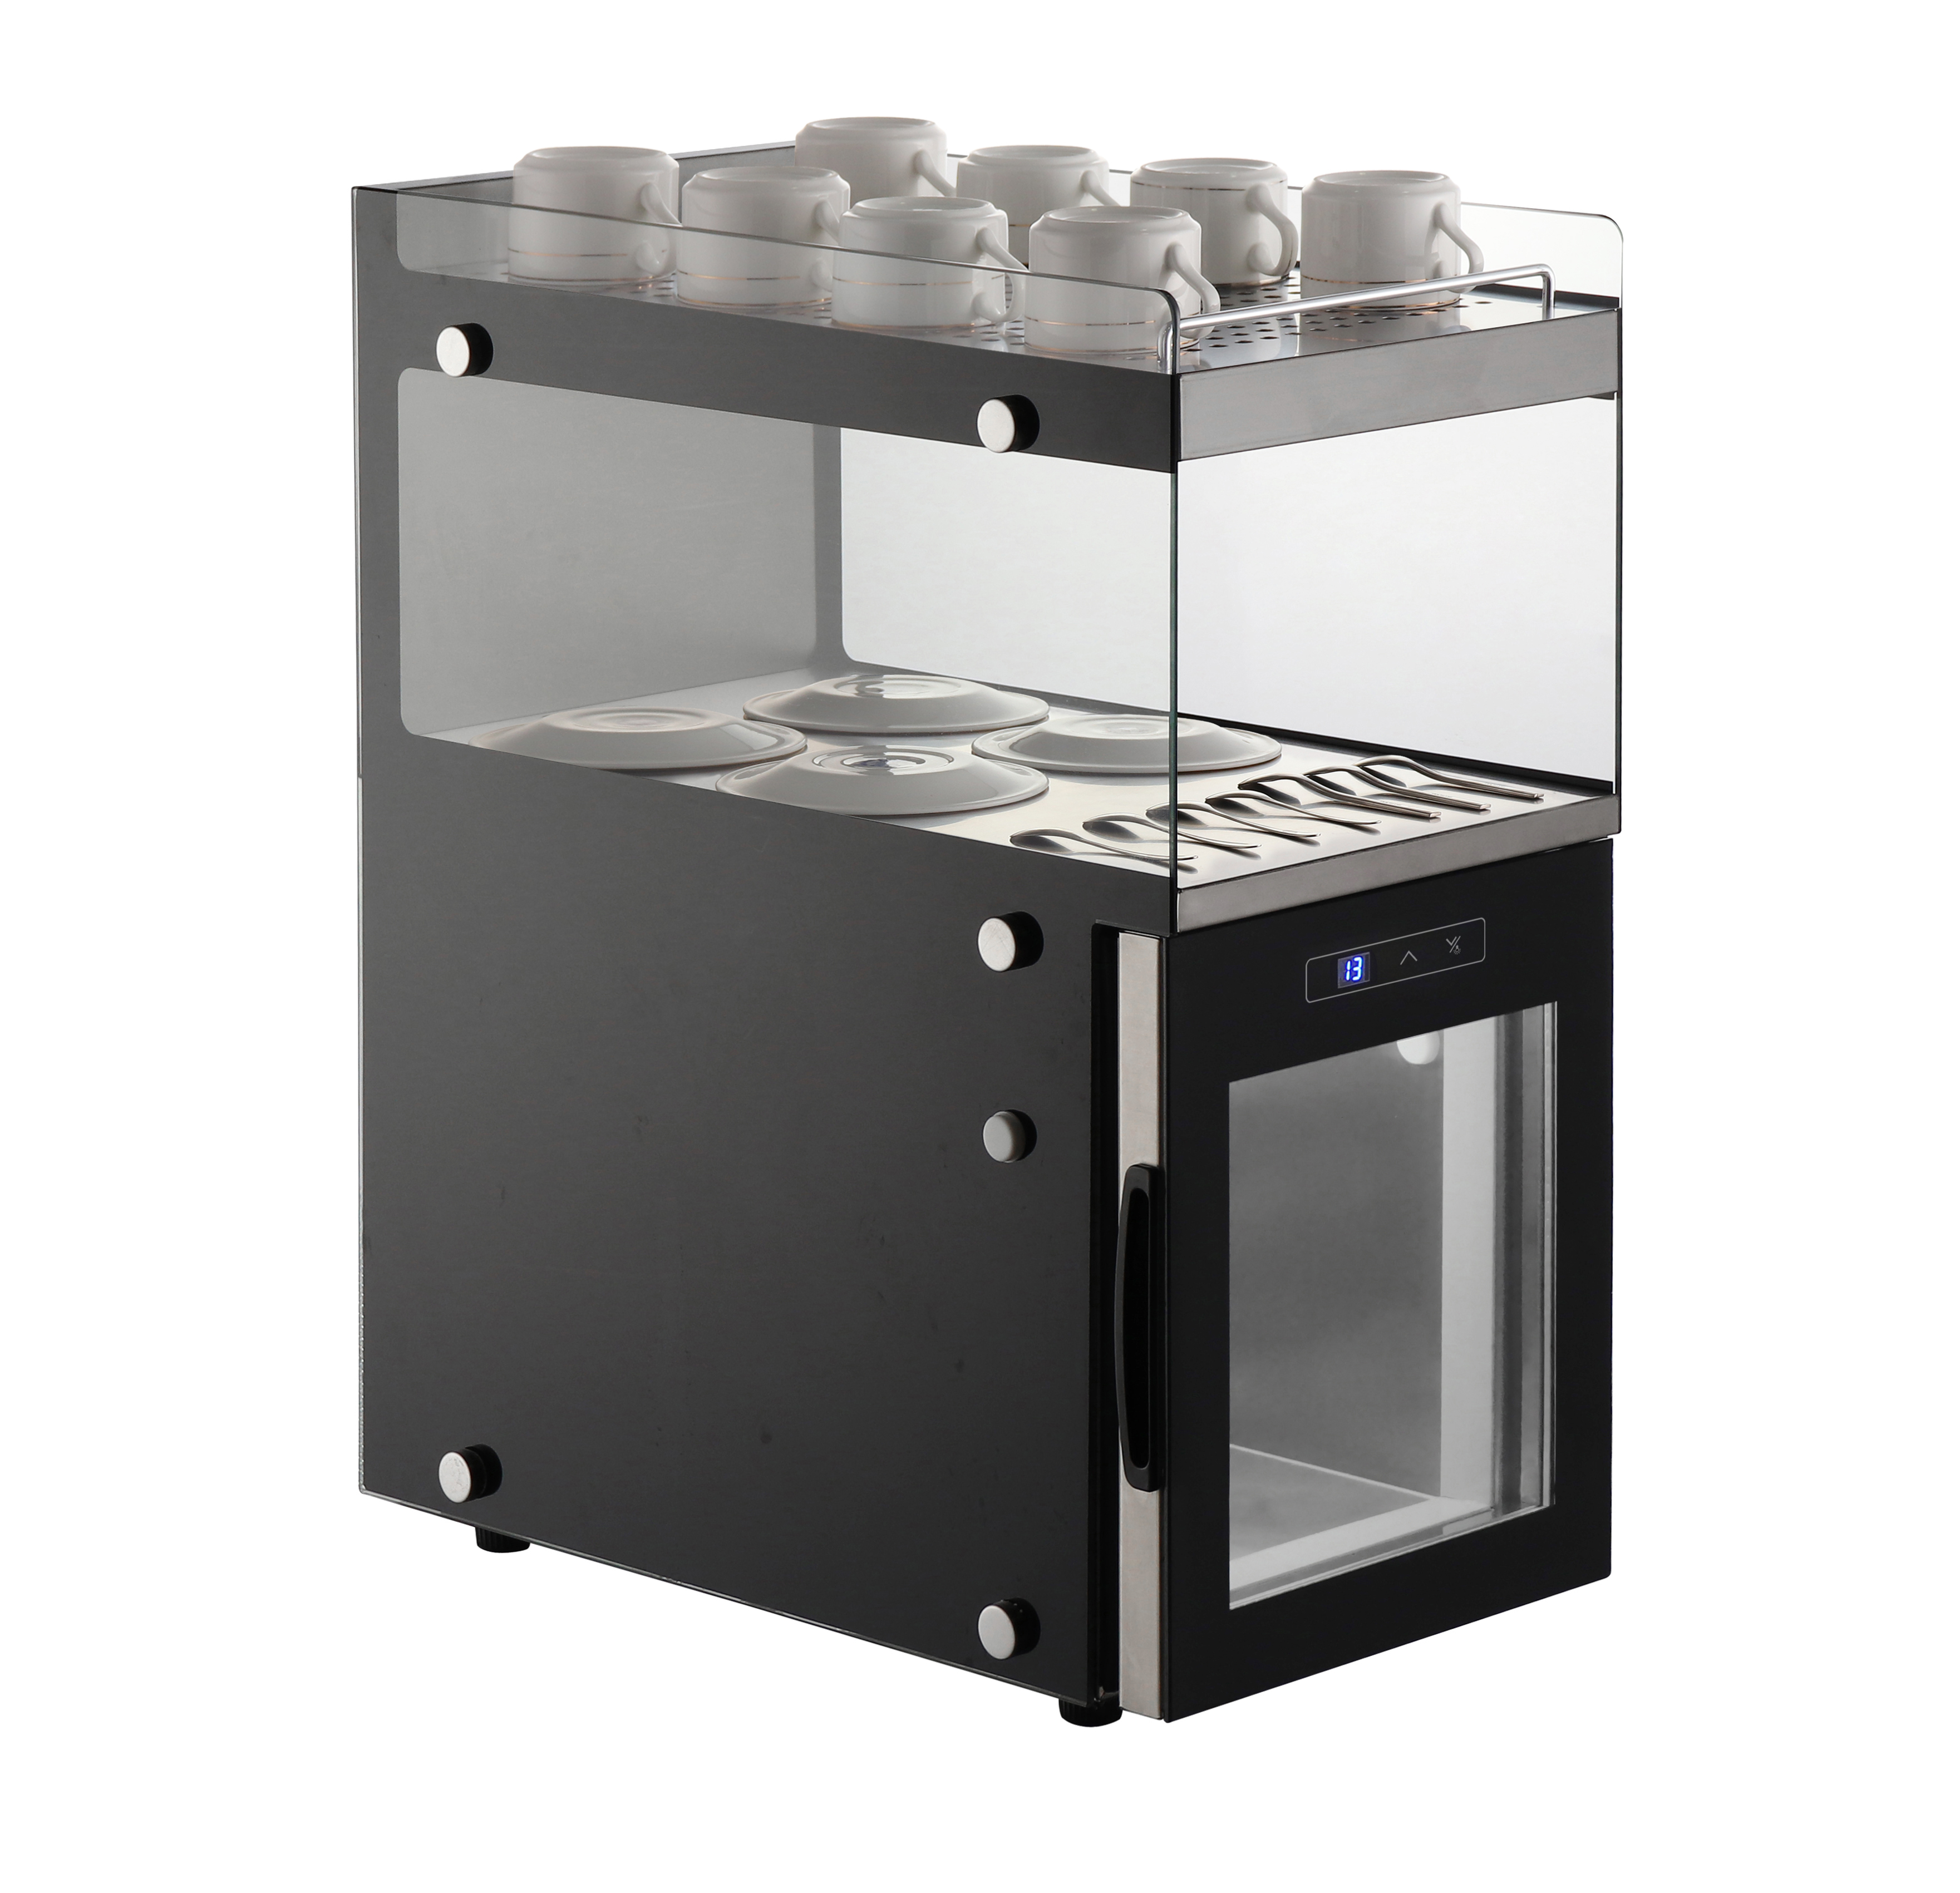 MILK REFRIGERATION WITH CUP WARMER